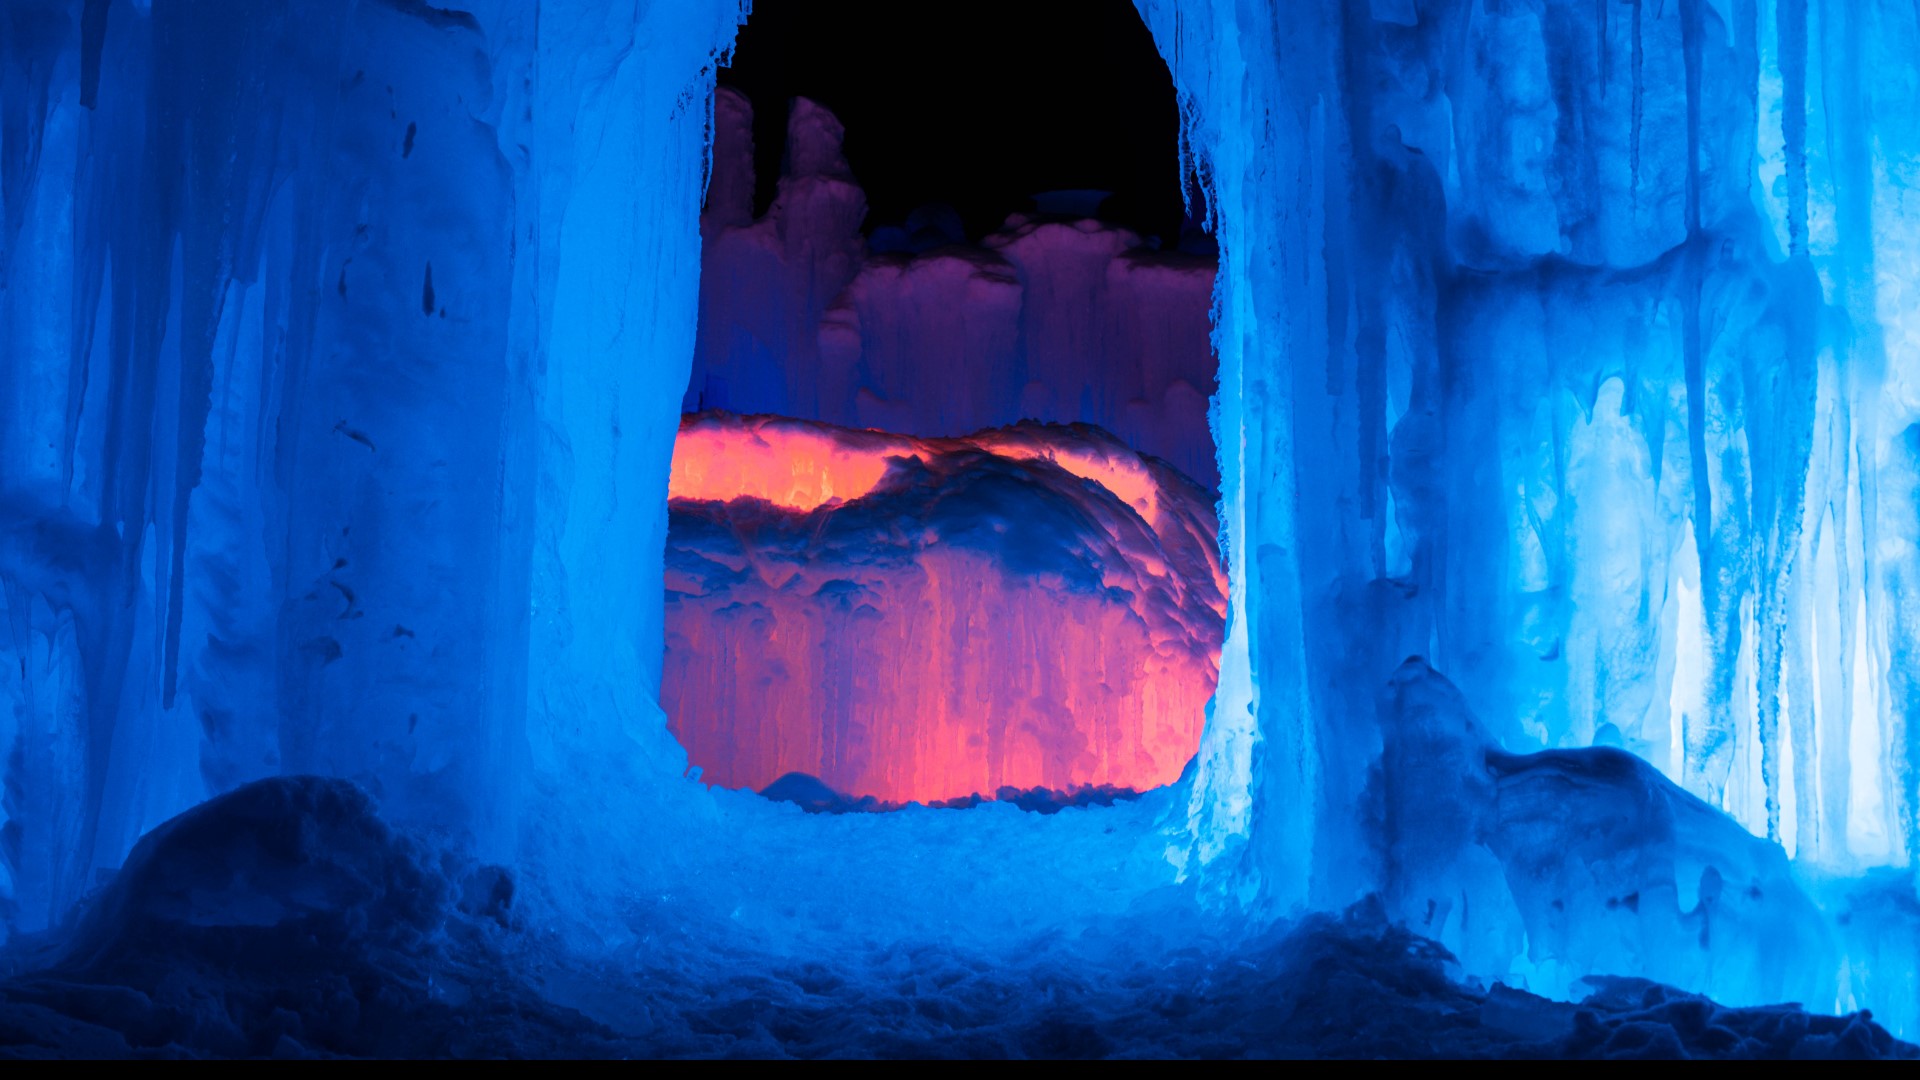 Check out some photos from the Ice Castles in Colorado's mountains.